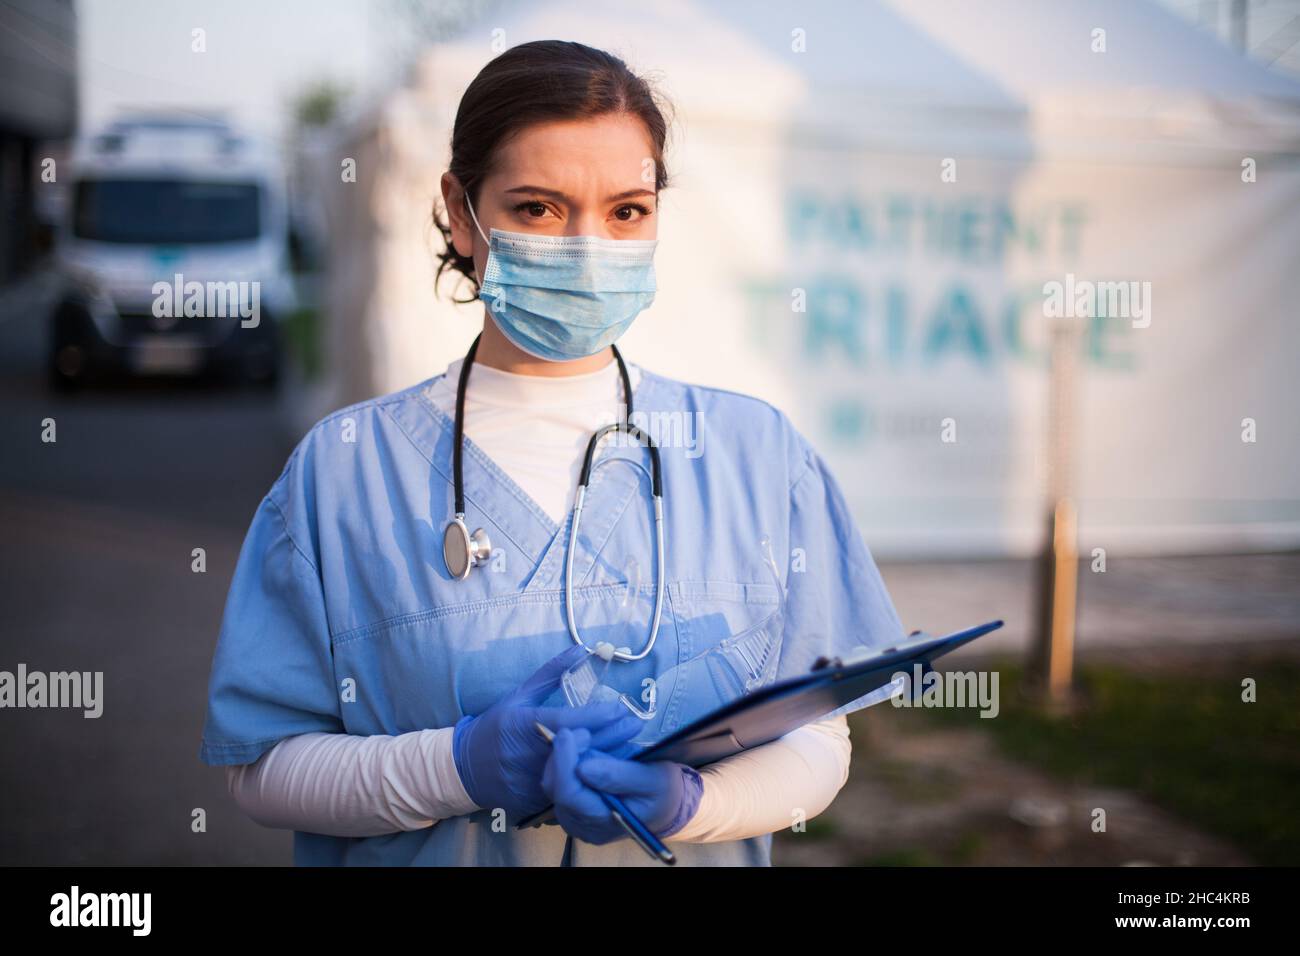 Serious female UK NHS doctor wearing protective equipment face mask,standing next to triage tent and ambulance car in front of emergency hospital,worr Stock Photo